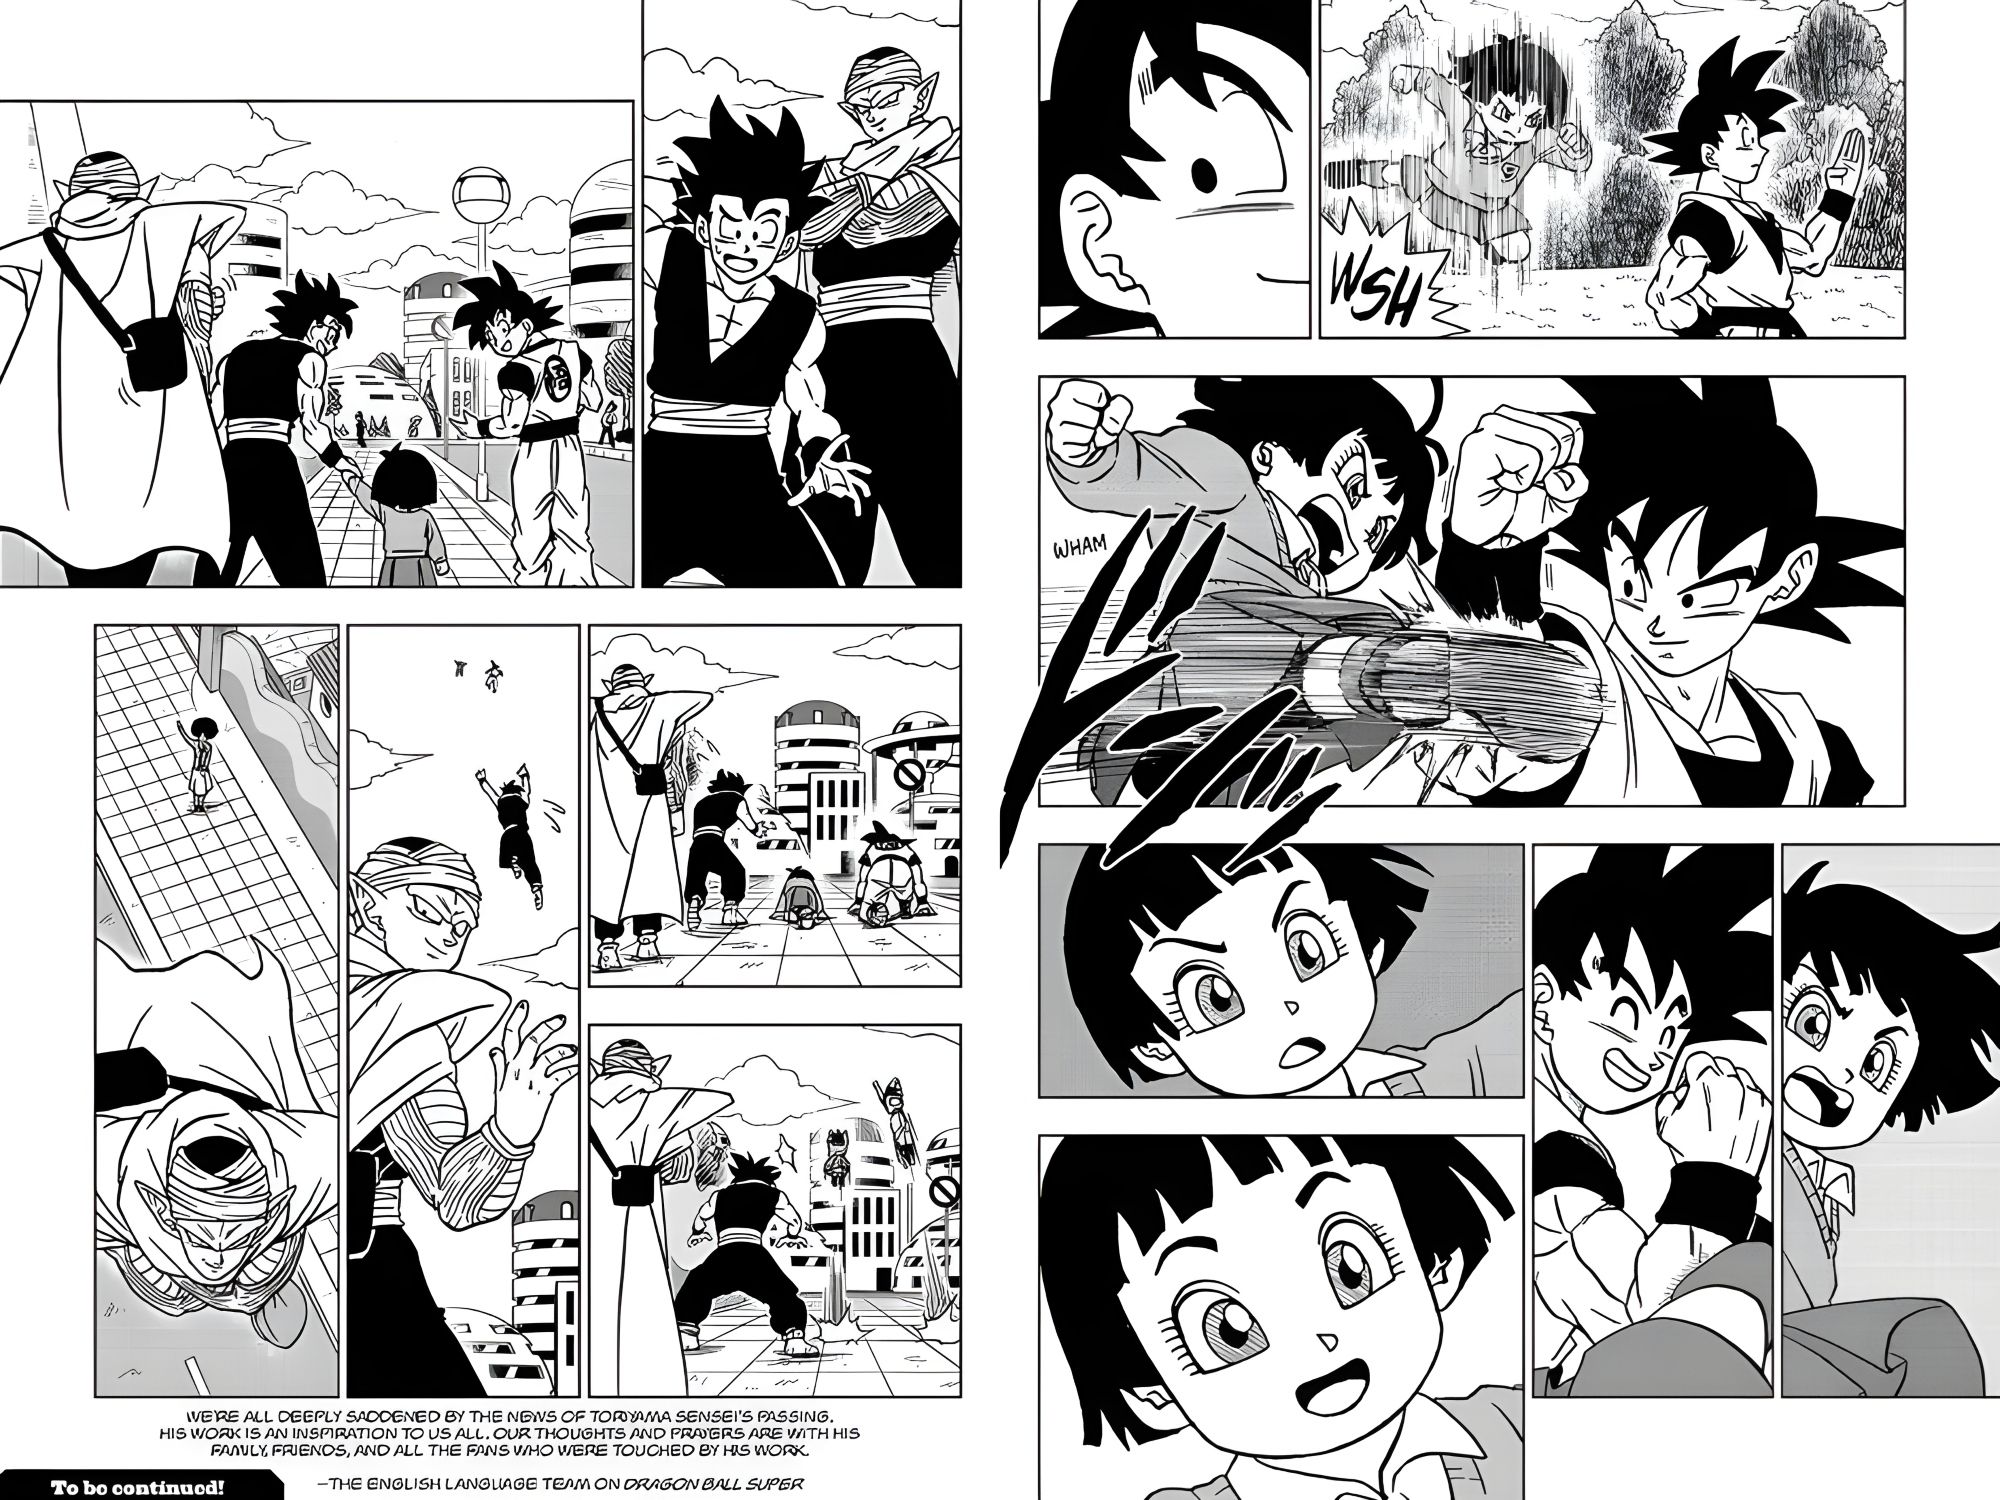 Pan attacks her grandfather from behind and lights up when he blocks her kick, and the two bond and fly away with Gohan and Piccolo in Dragon Ball Super.